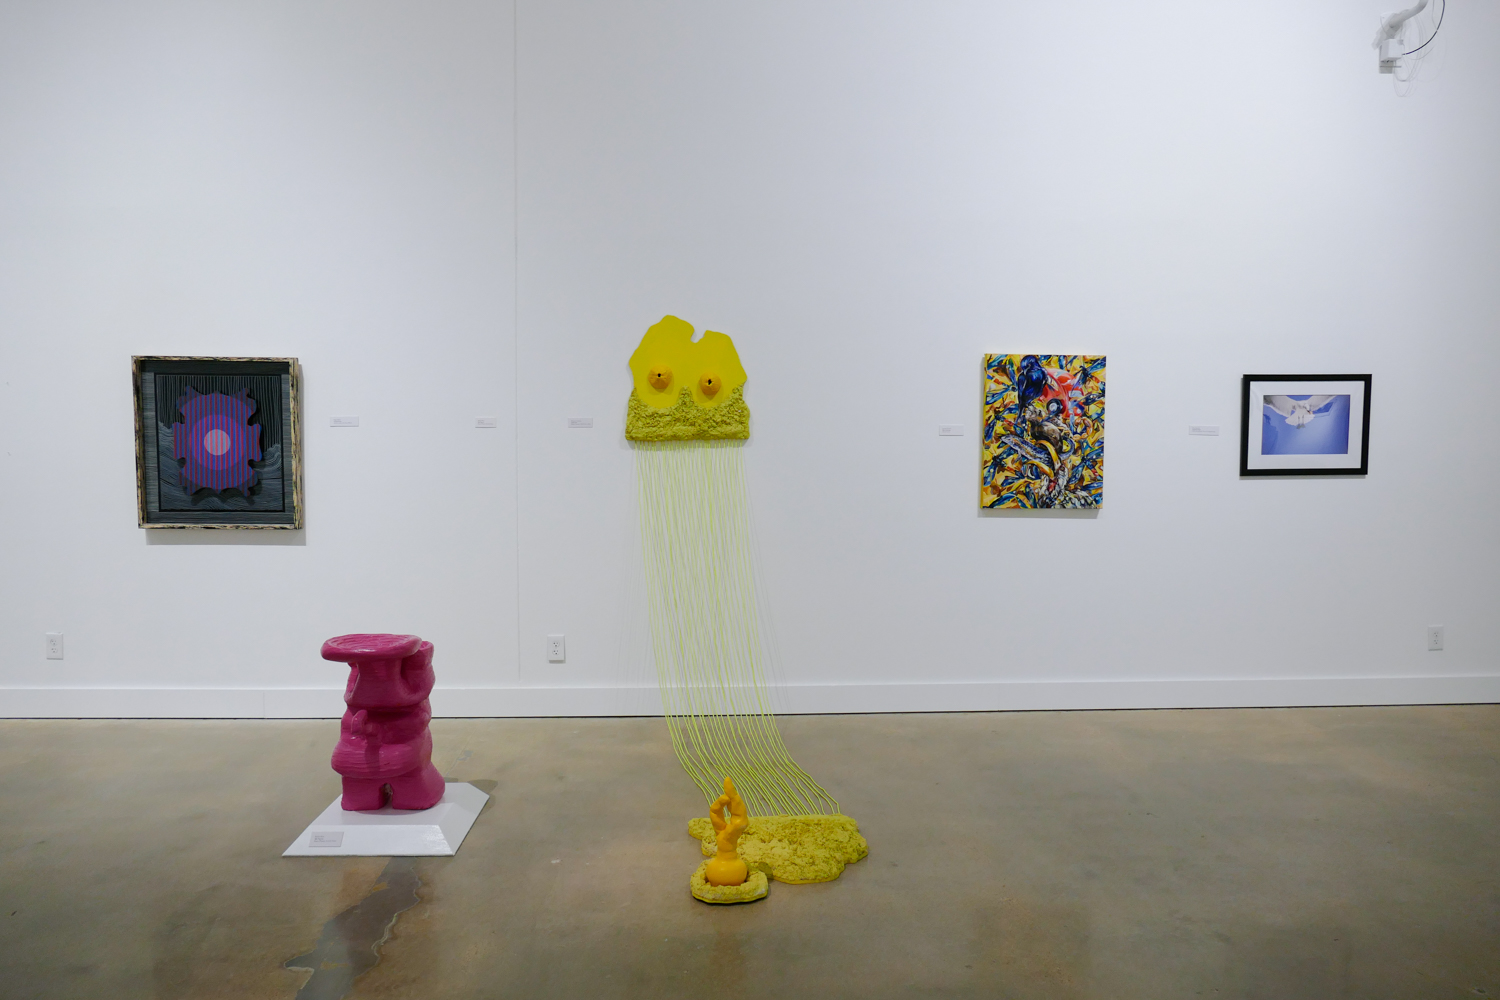 35th Annual Juried Student Exhibition - Installation Views